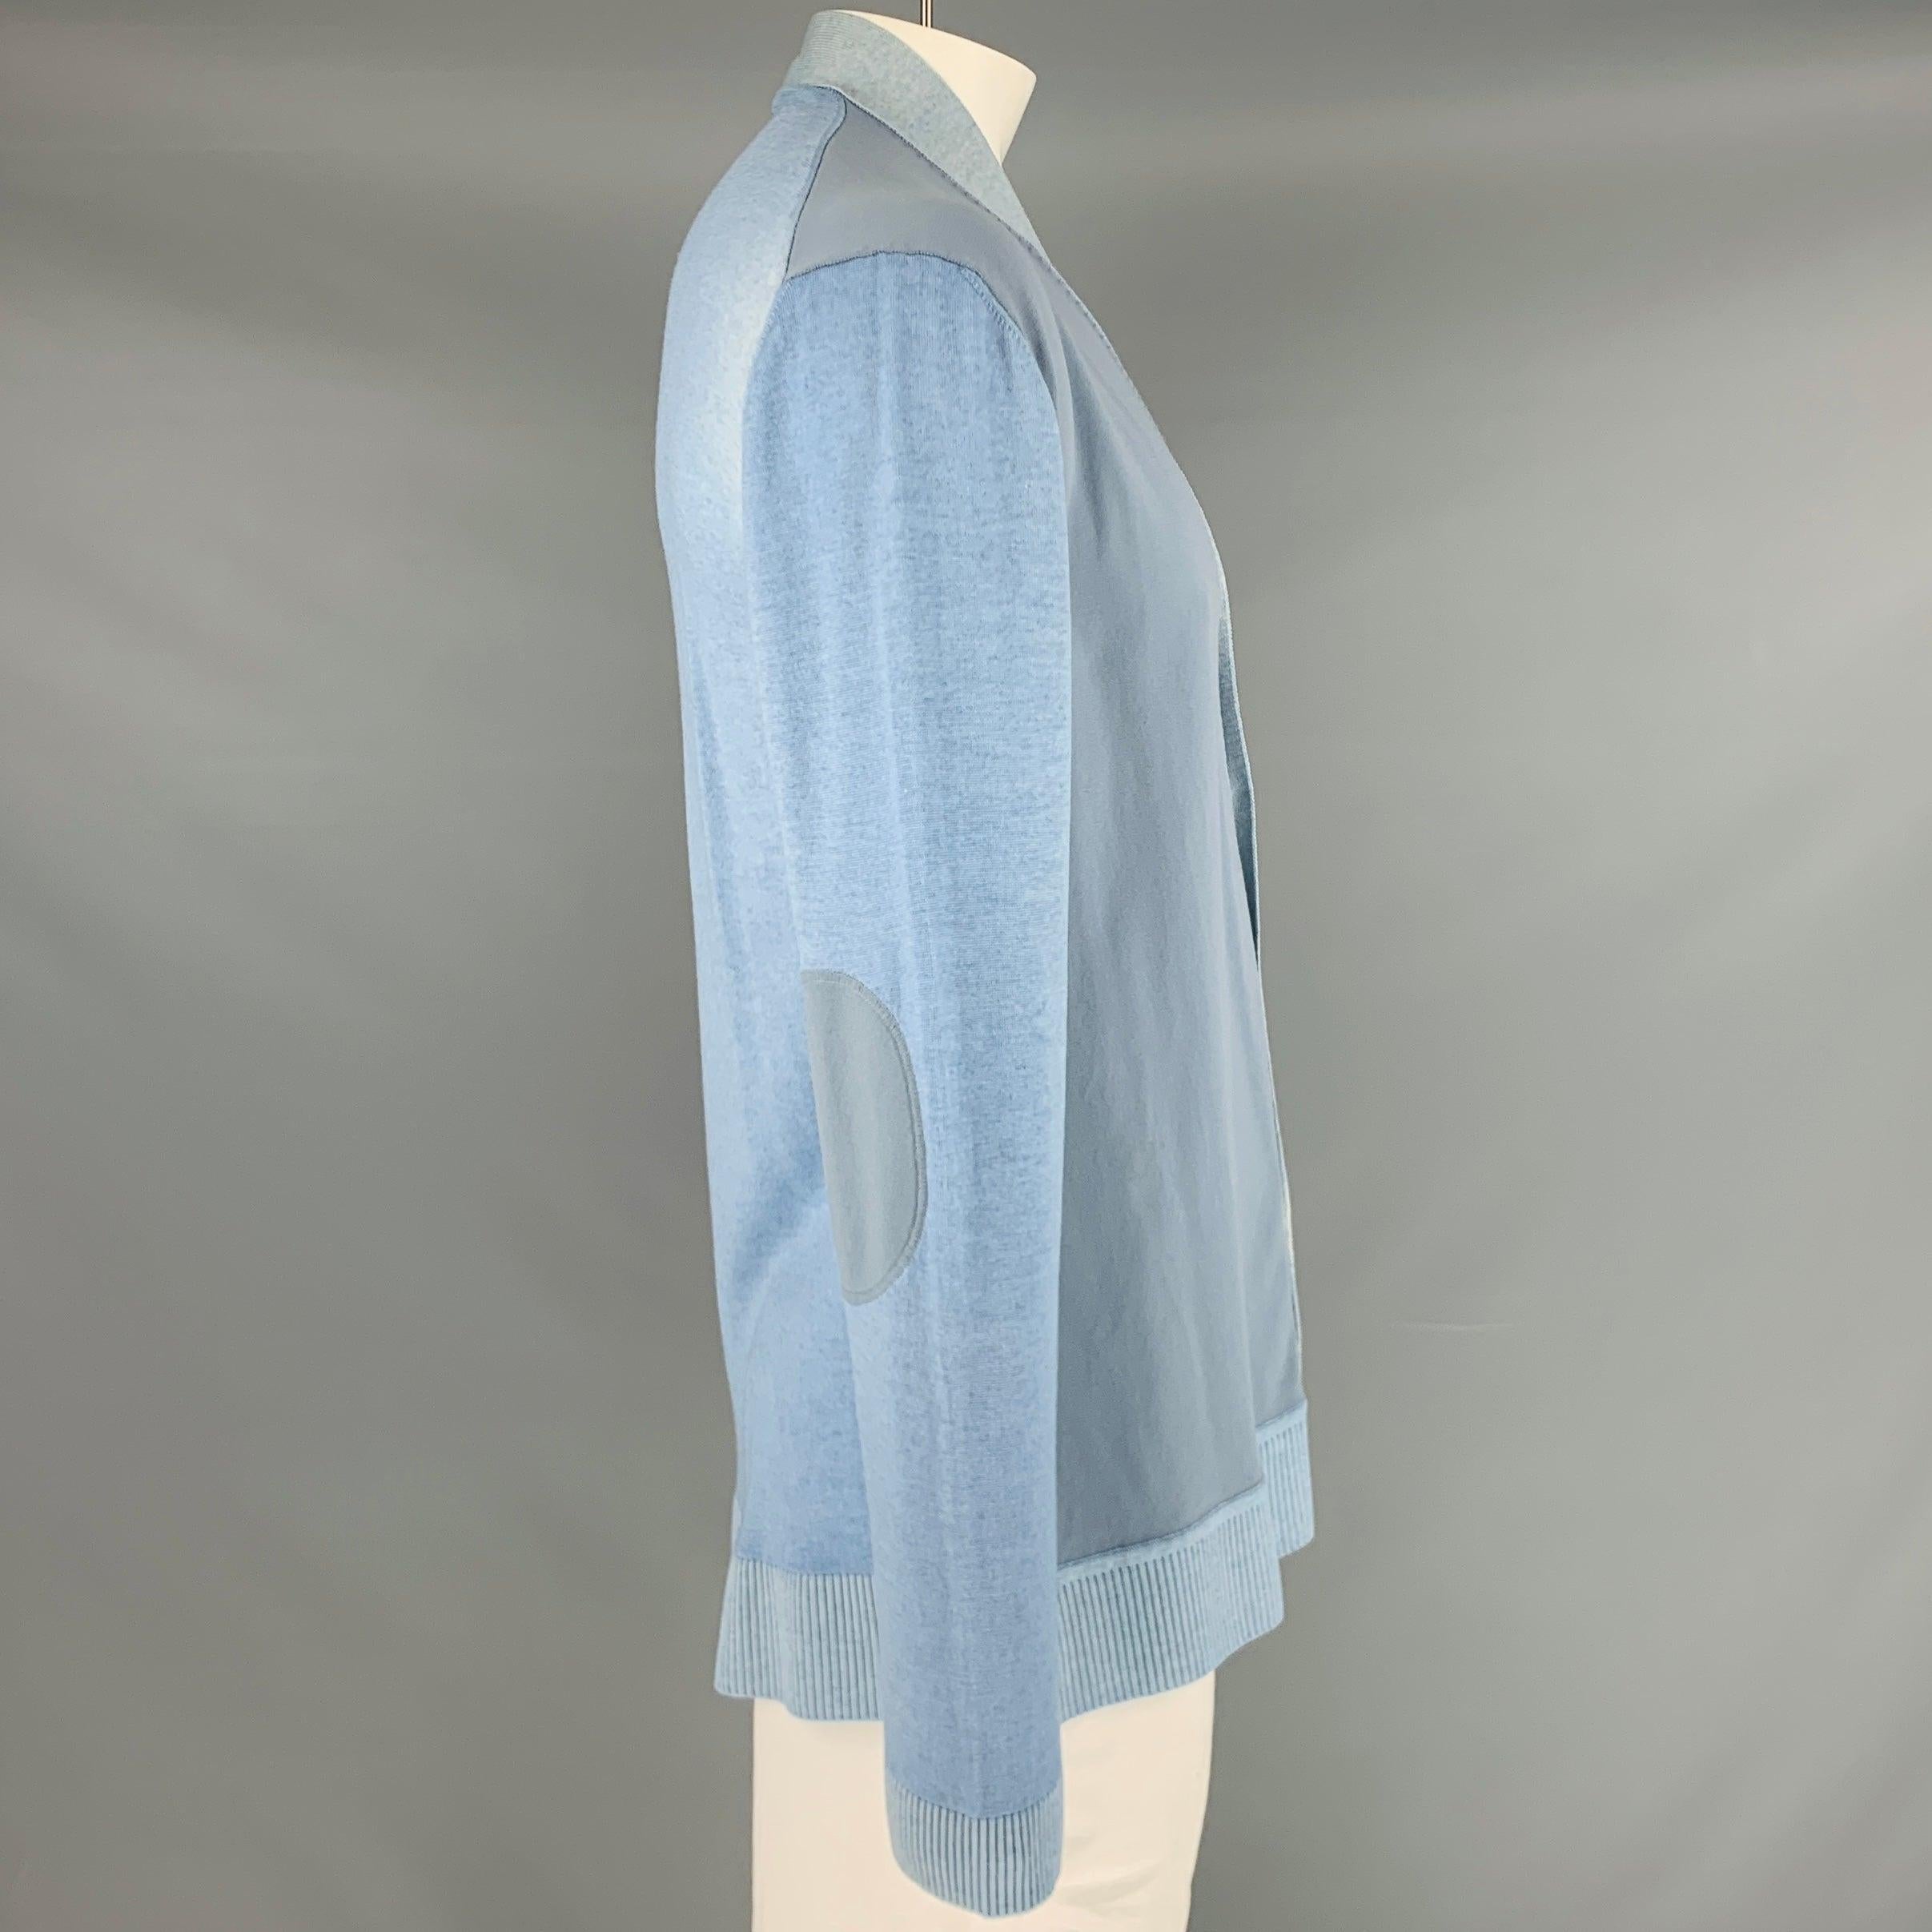 MARNI cardigan
in a blue wool blend knit featuring elbow patches, V-neck, and button closure. Made in Italy.Very Good Pre-Owned Condition. Moderate signs of wear. 

Marked:   54 

Measurements: 
 
Shoulder: 22 inches Chest: 44 inches Sleeve: 27.5